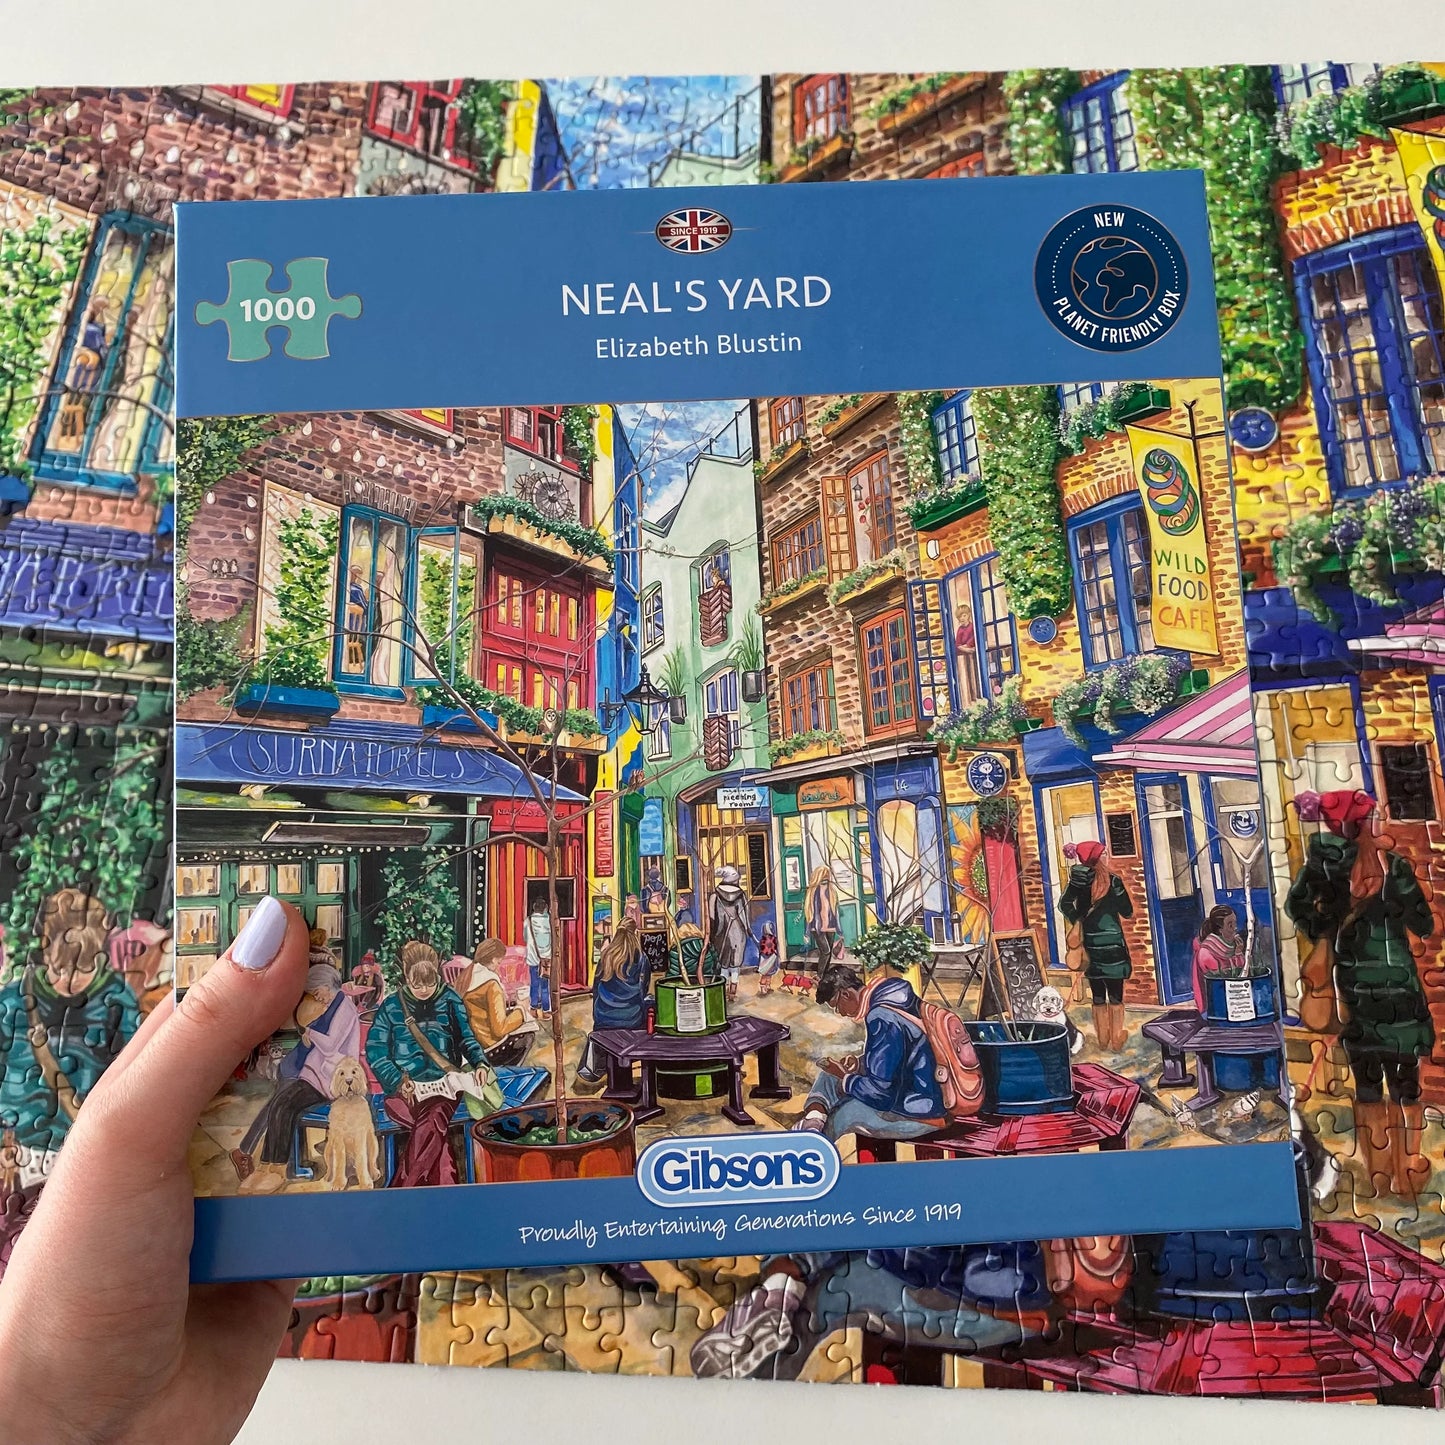 Gibsons - Neal's Yard  - 1000 Piece Jigsaw Puzzle